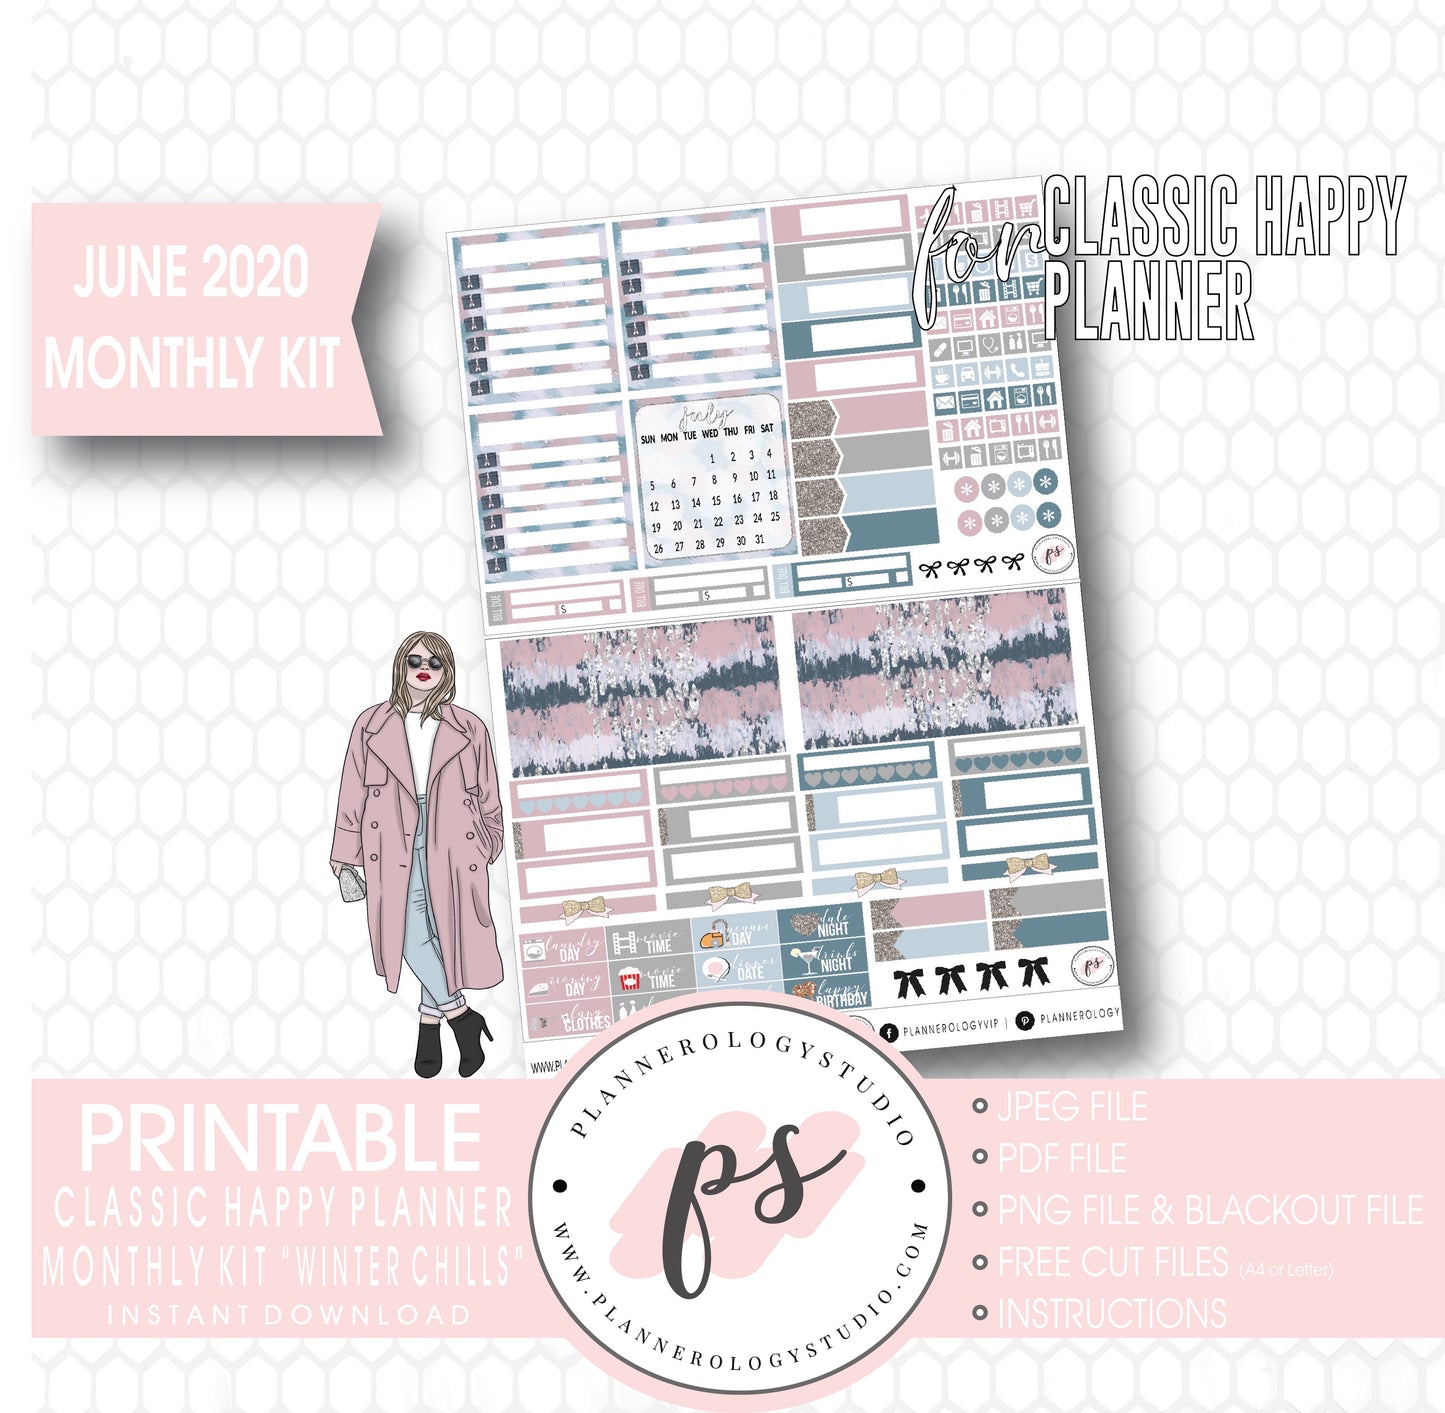 Winter Chills June 2020 Monthly View Kit Digital Printable Planner Stickers (for use with Classic Happy Planner) - Plannerologystudio